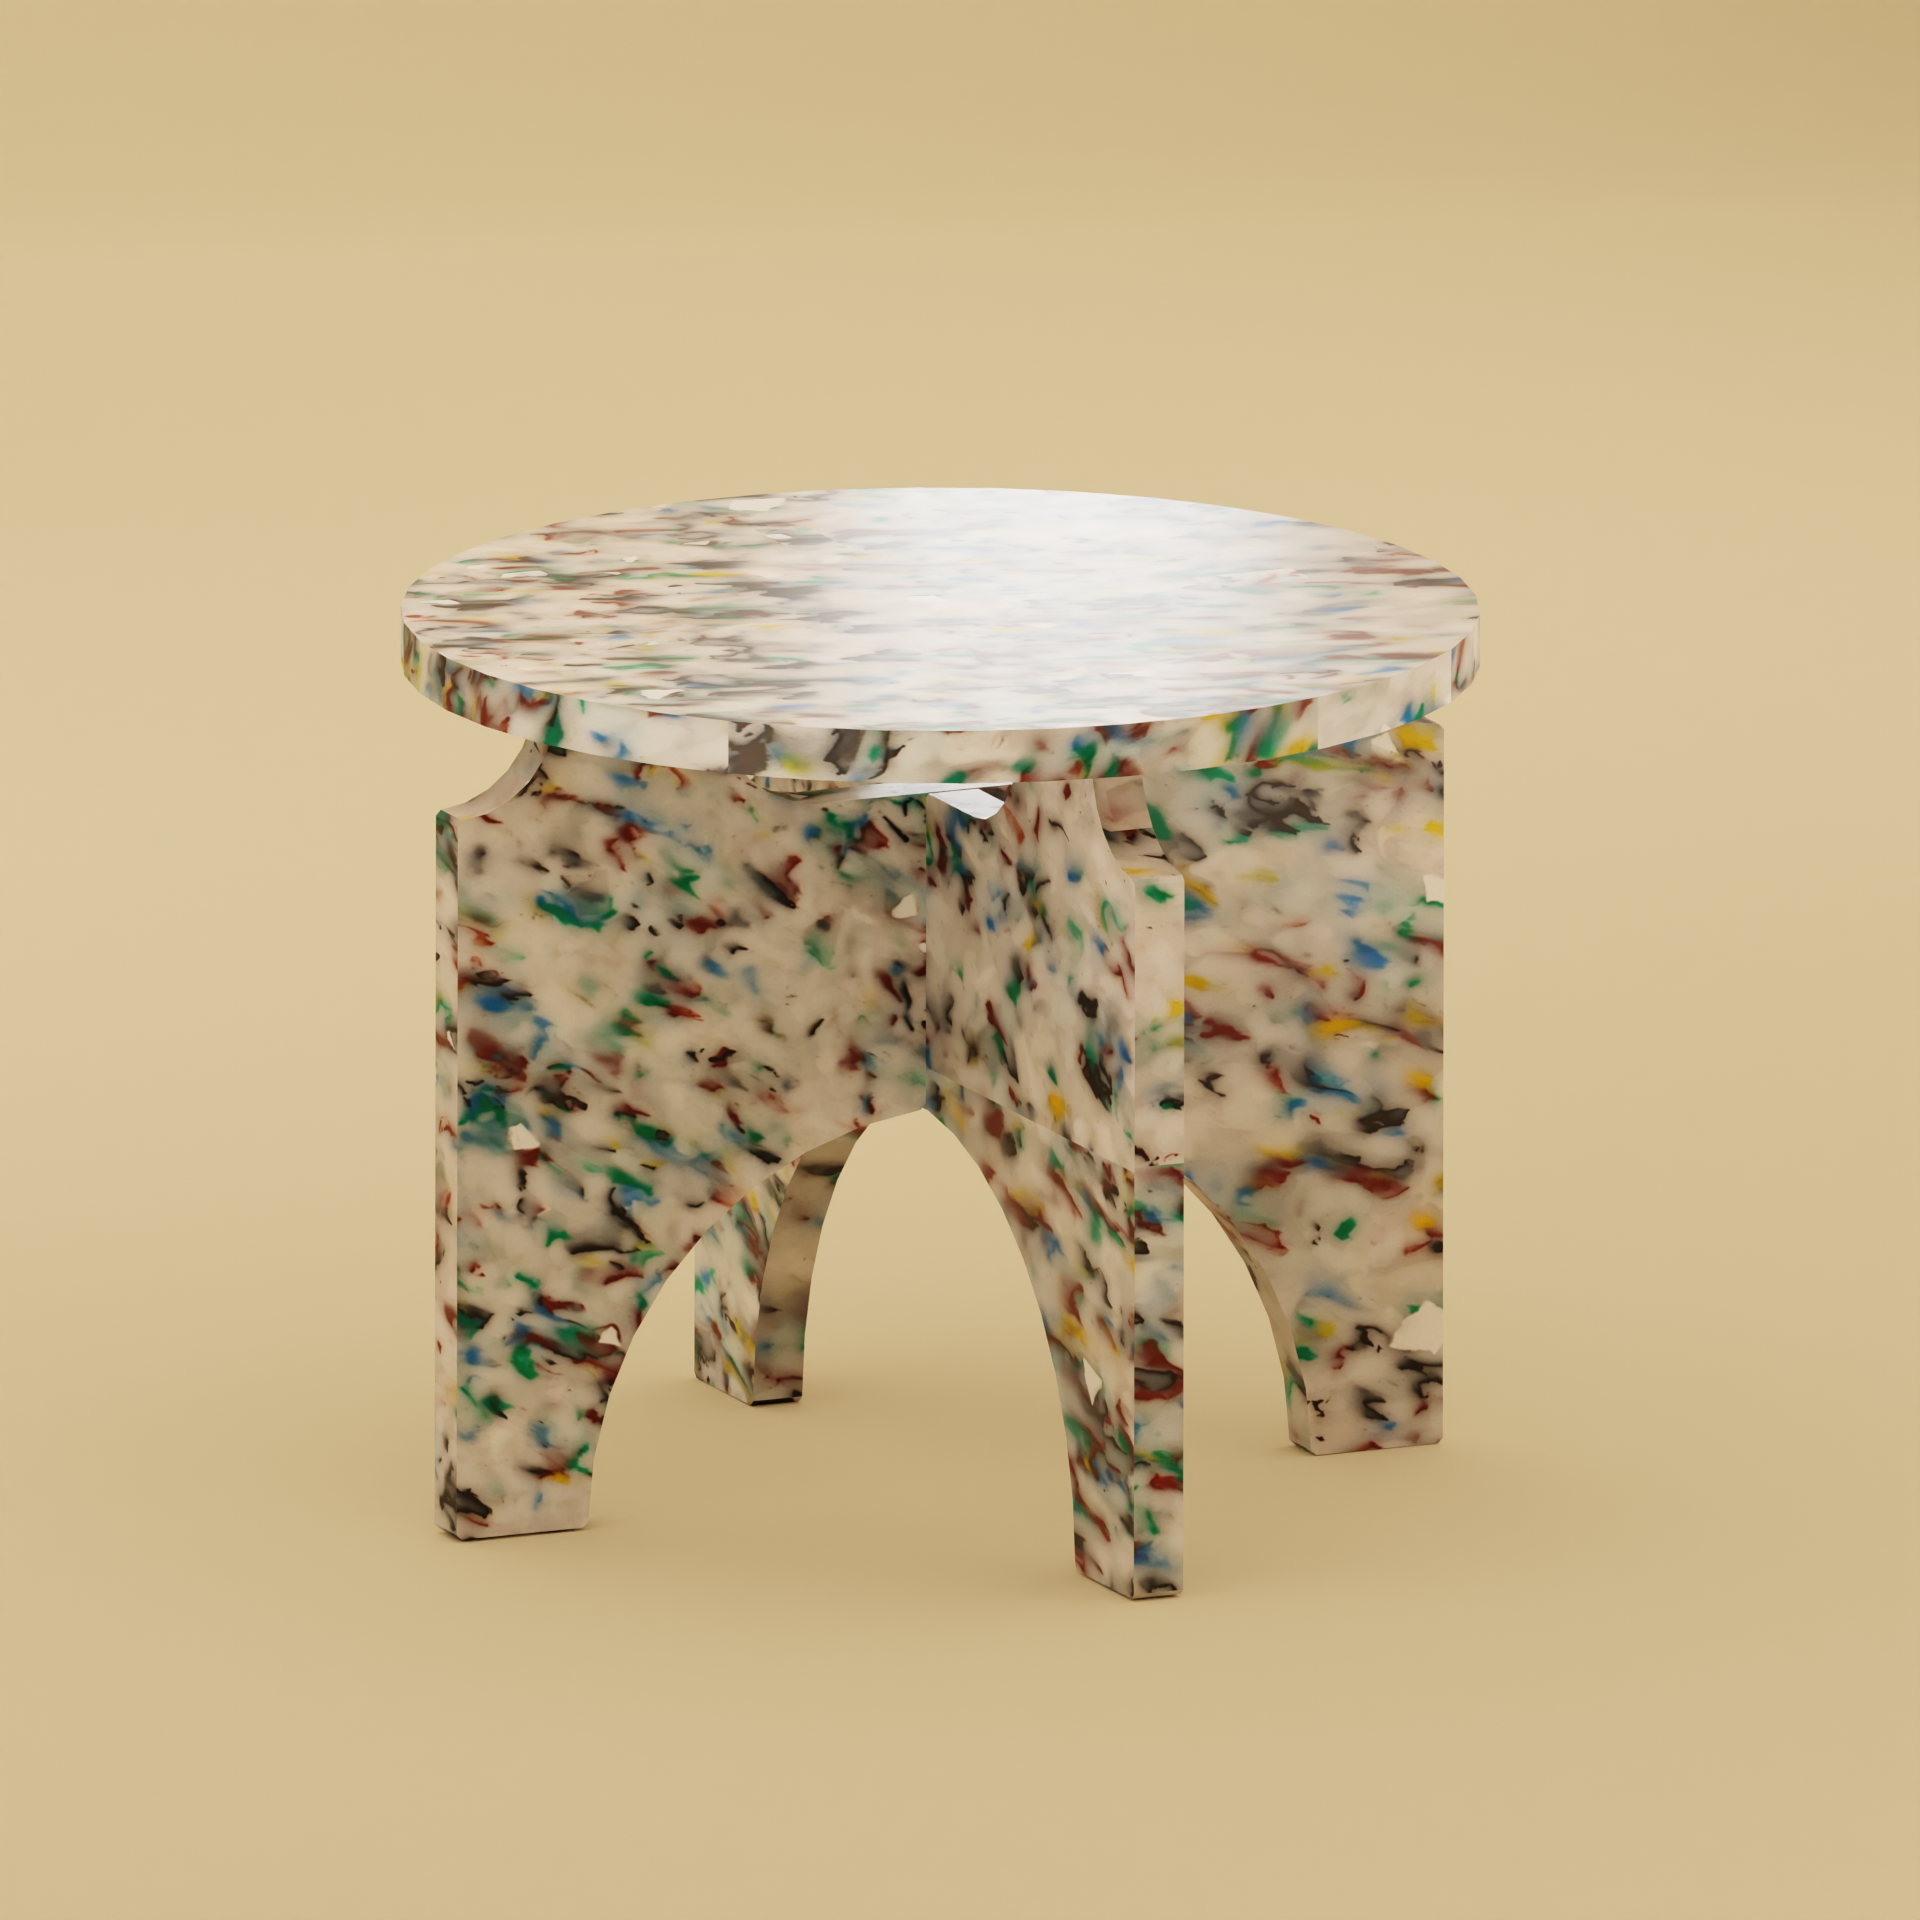 ROUND TOP STOOL BY THE MINIMONO PROJECT - BRAND FOR ECO FRIENDLY - PLAYFUL - MULTI FUNCTIONAL - SUSTAINABLE - HIGH QUALITY - DESIGN FURNITURE FROM RECYCLED PLASTIC FOR BOTH ADULT AND CHILDREN MADE IN BERLIN GERMANY